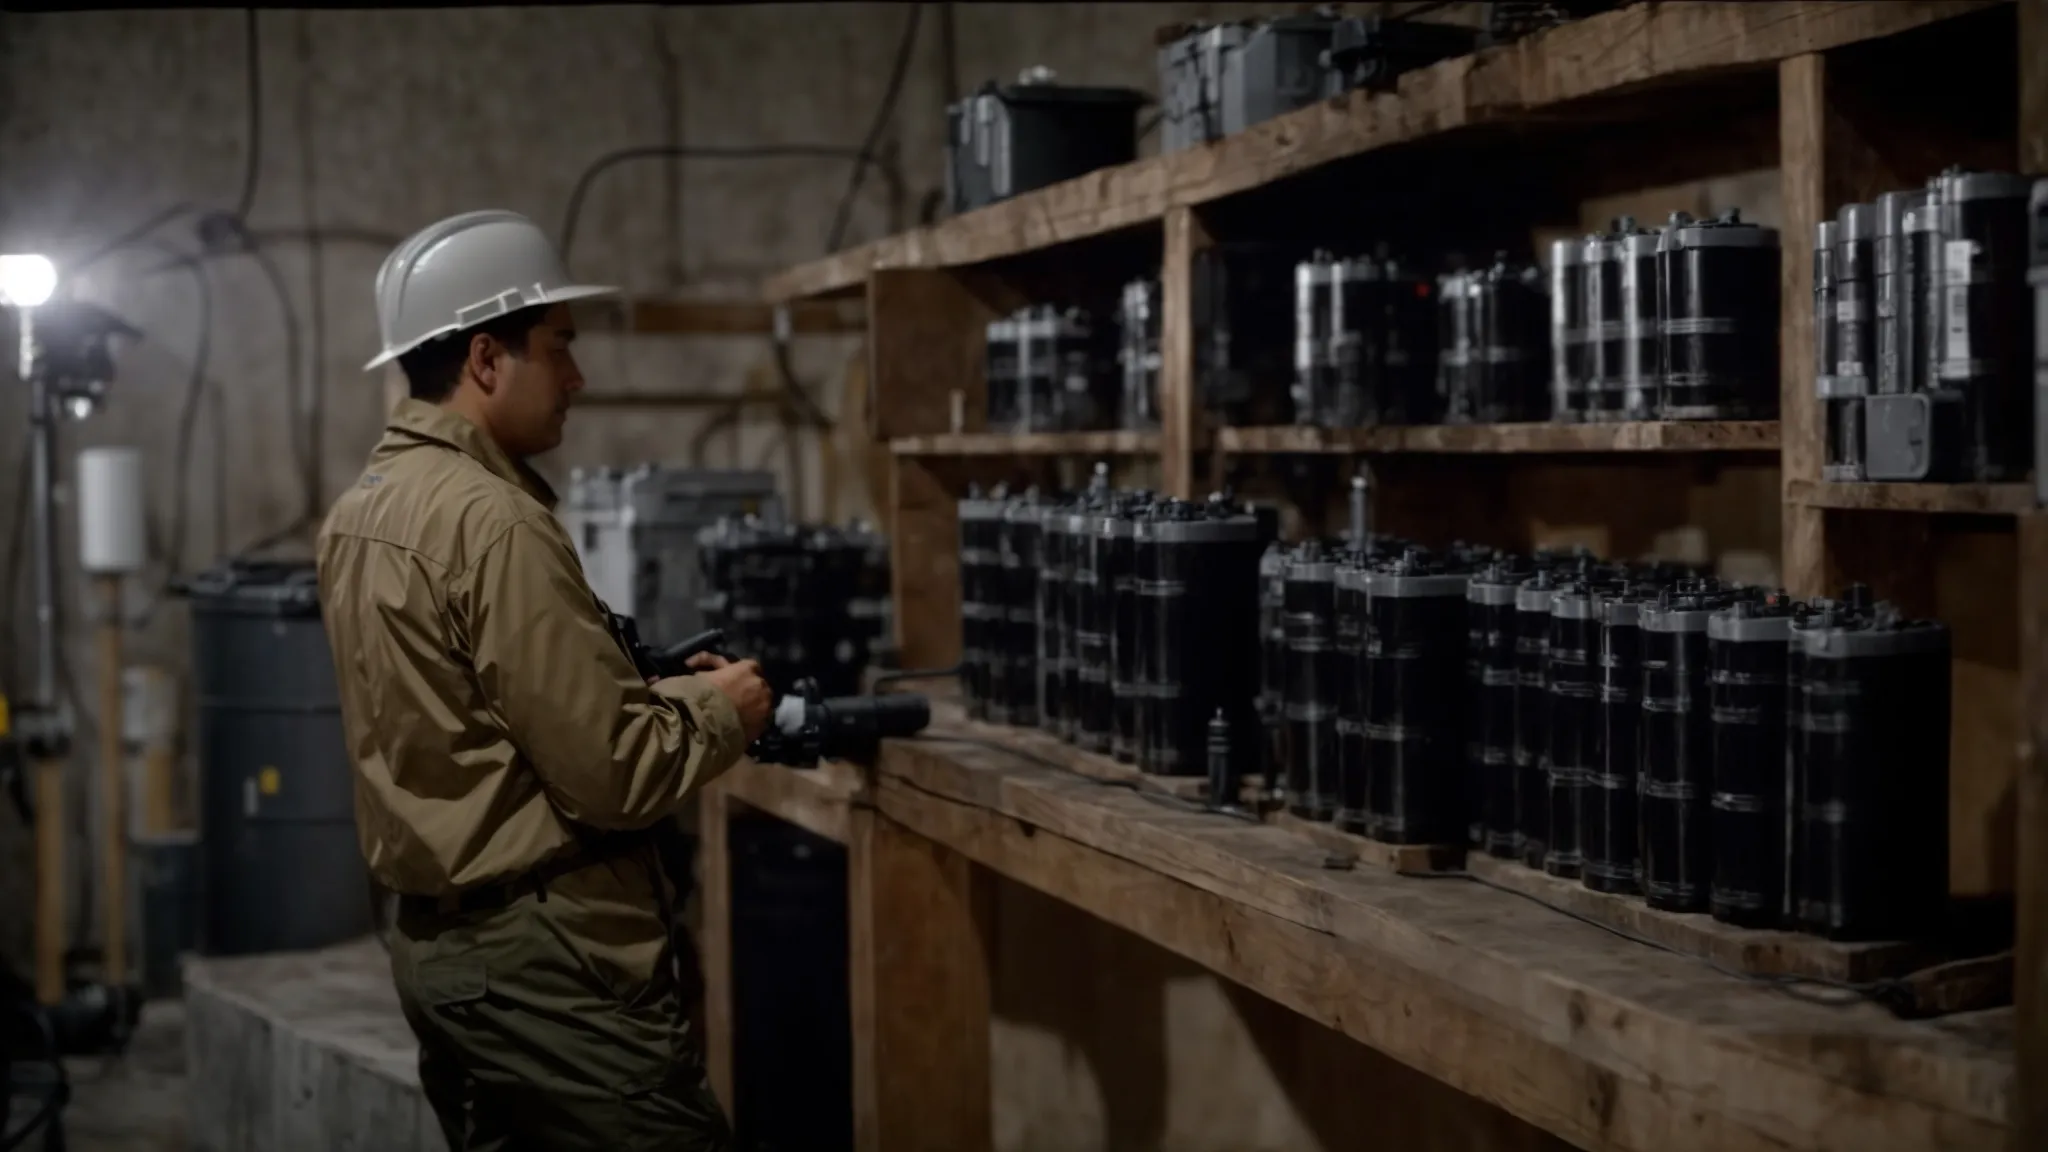 a professional is examining a row of heavy-duty batteries arrayed next to a sump pump system in a basement.